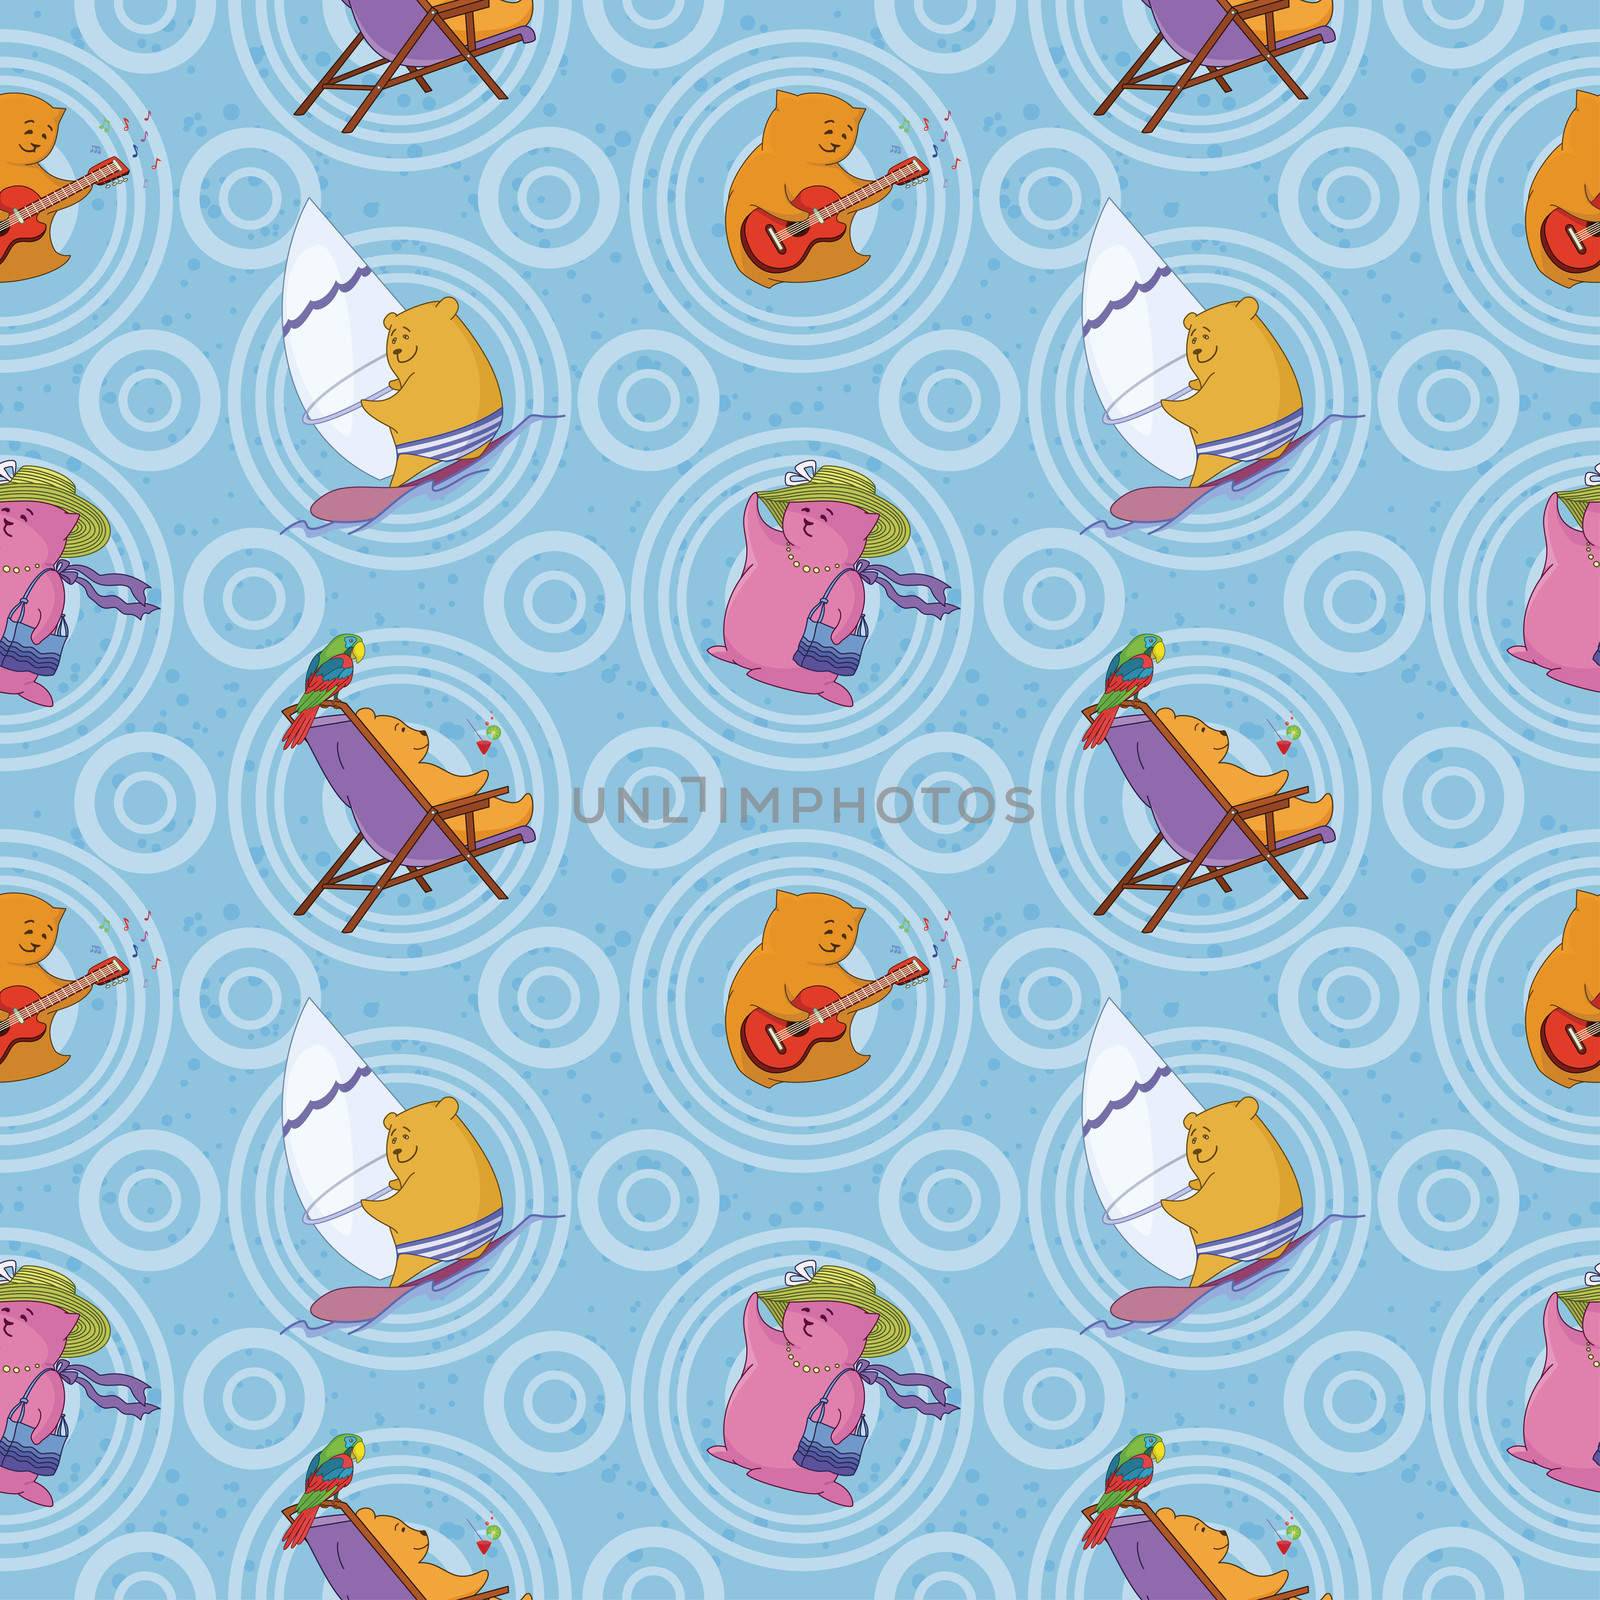 Seamless background, cartoon toy animals and abstract pattern.